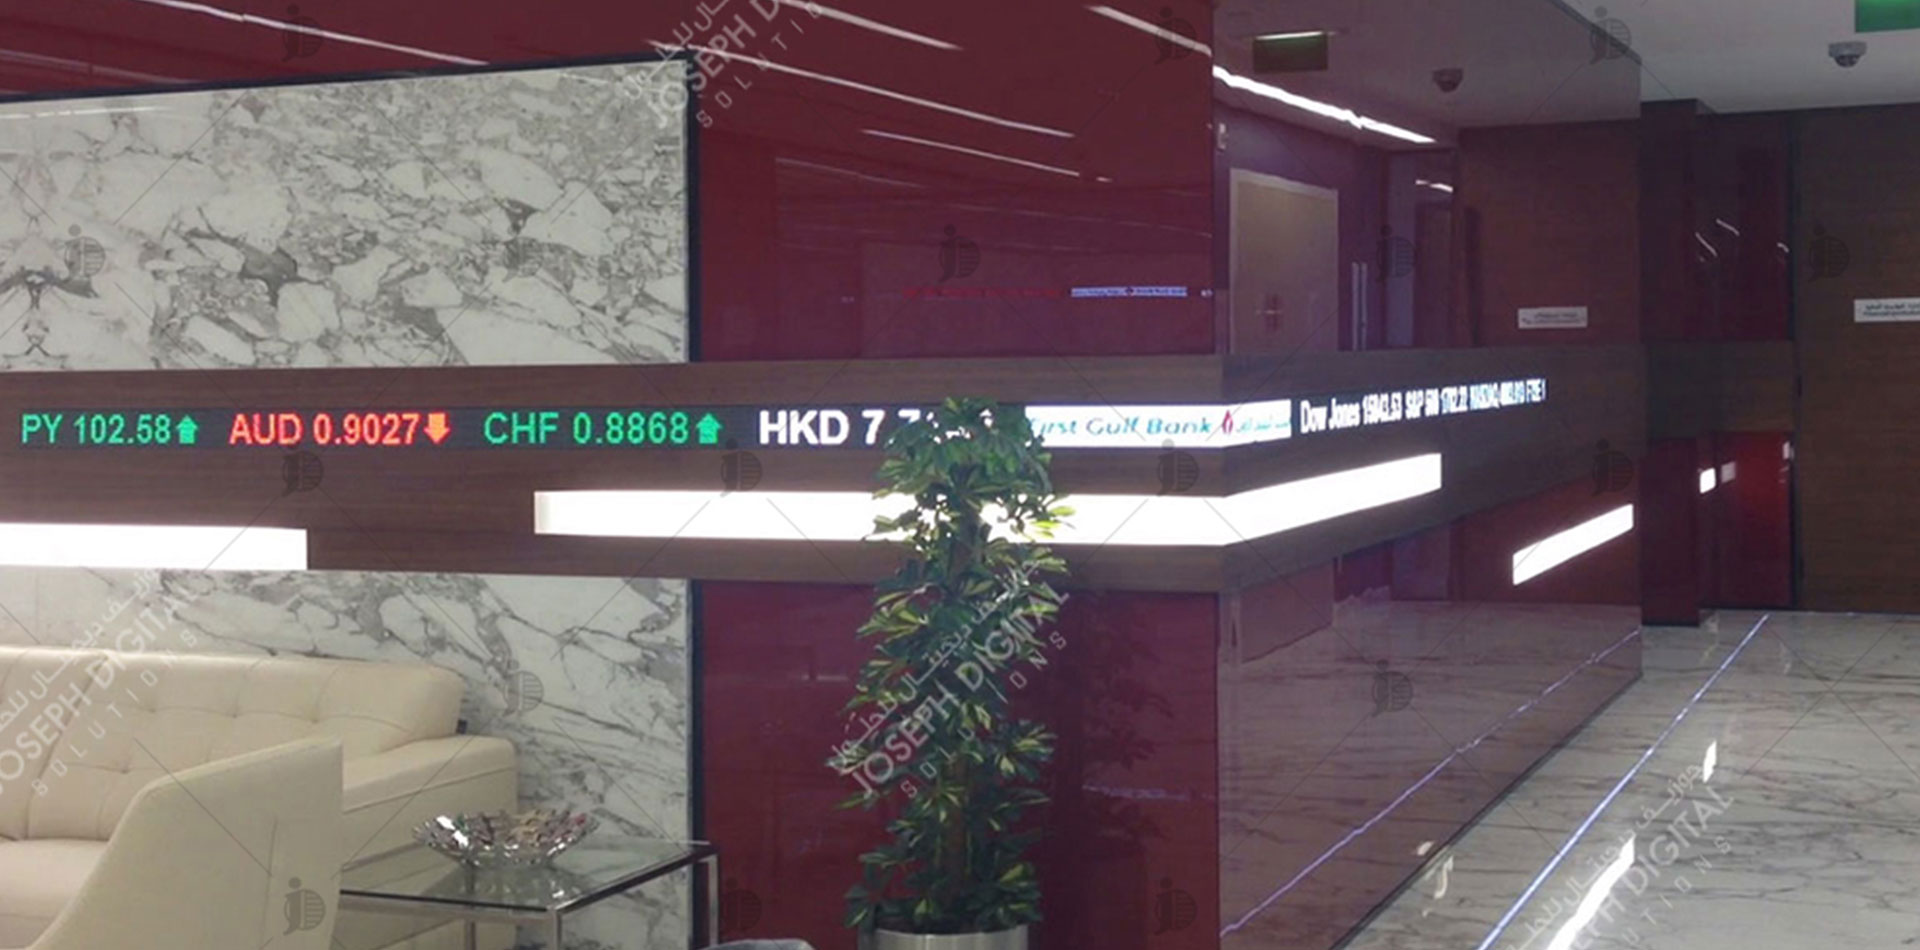 LED ticker Signage of First Gulf Bank